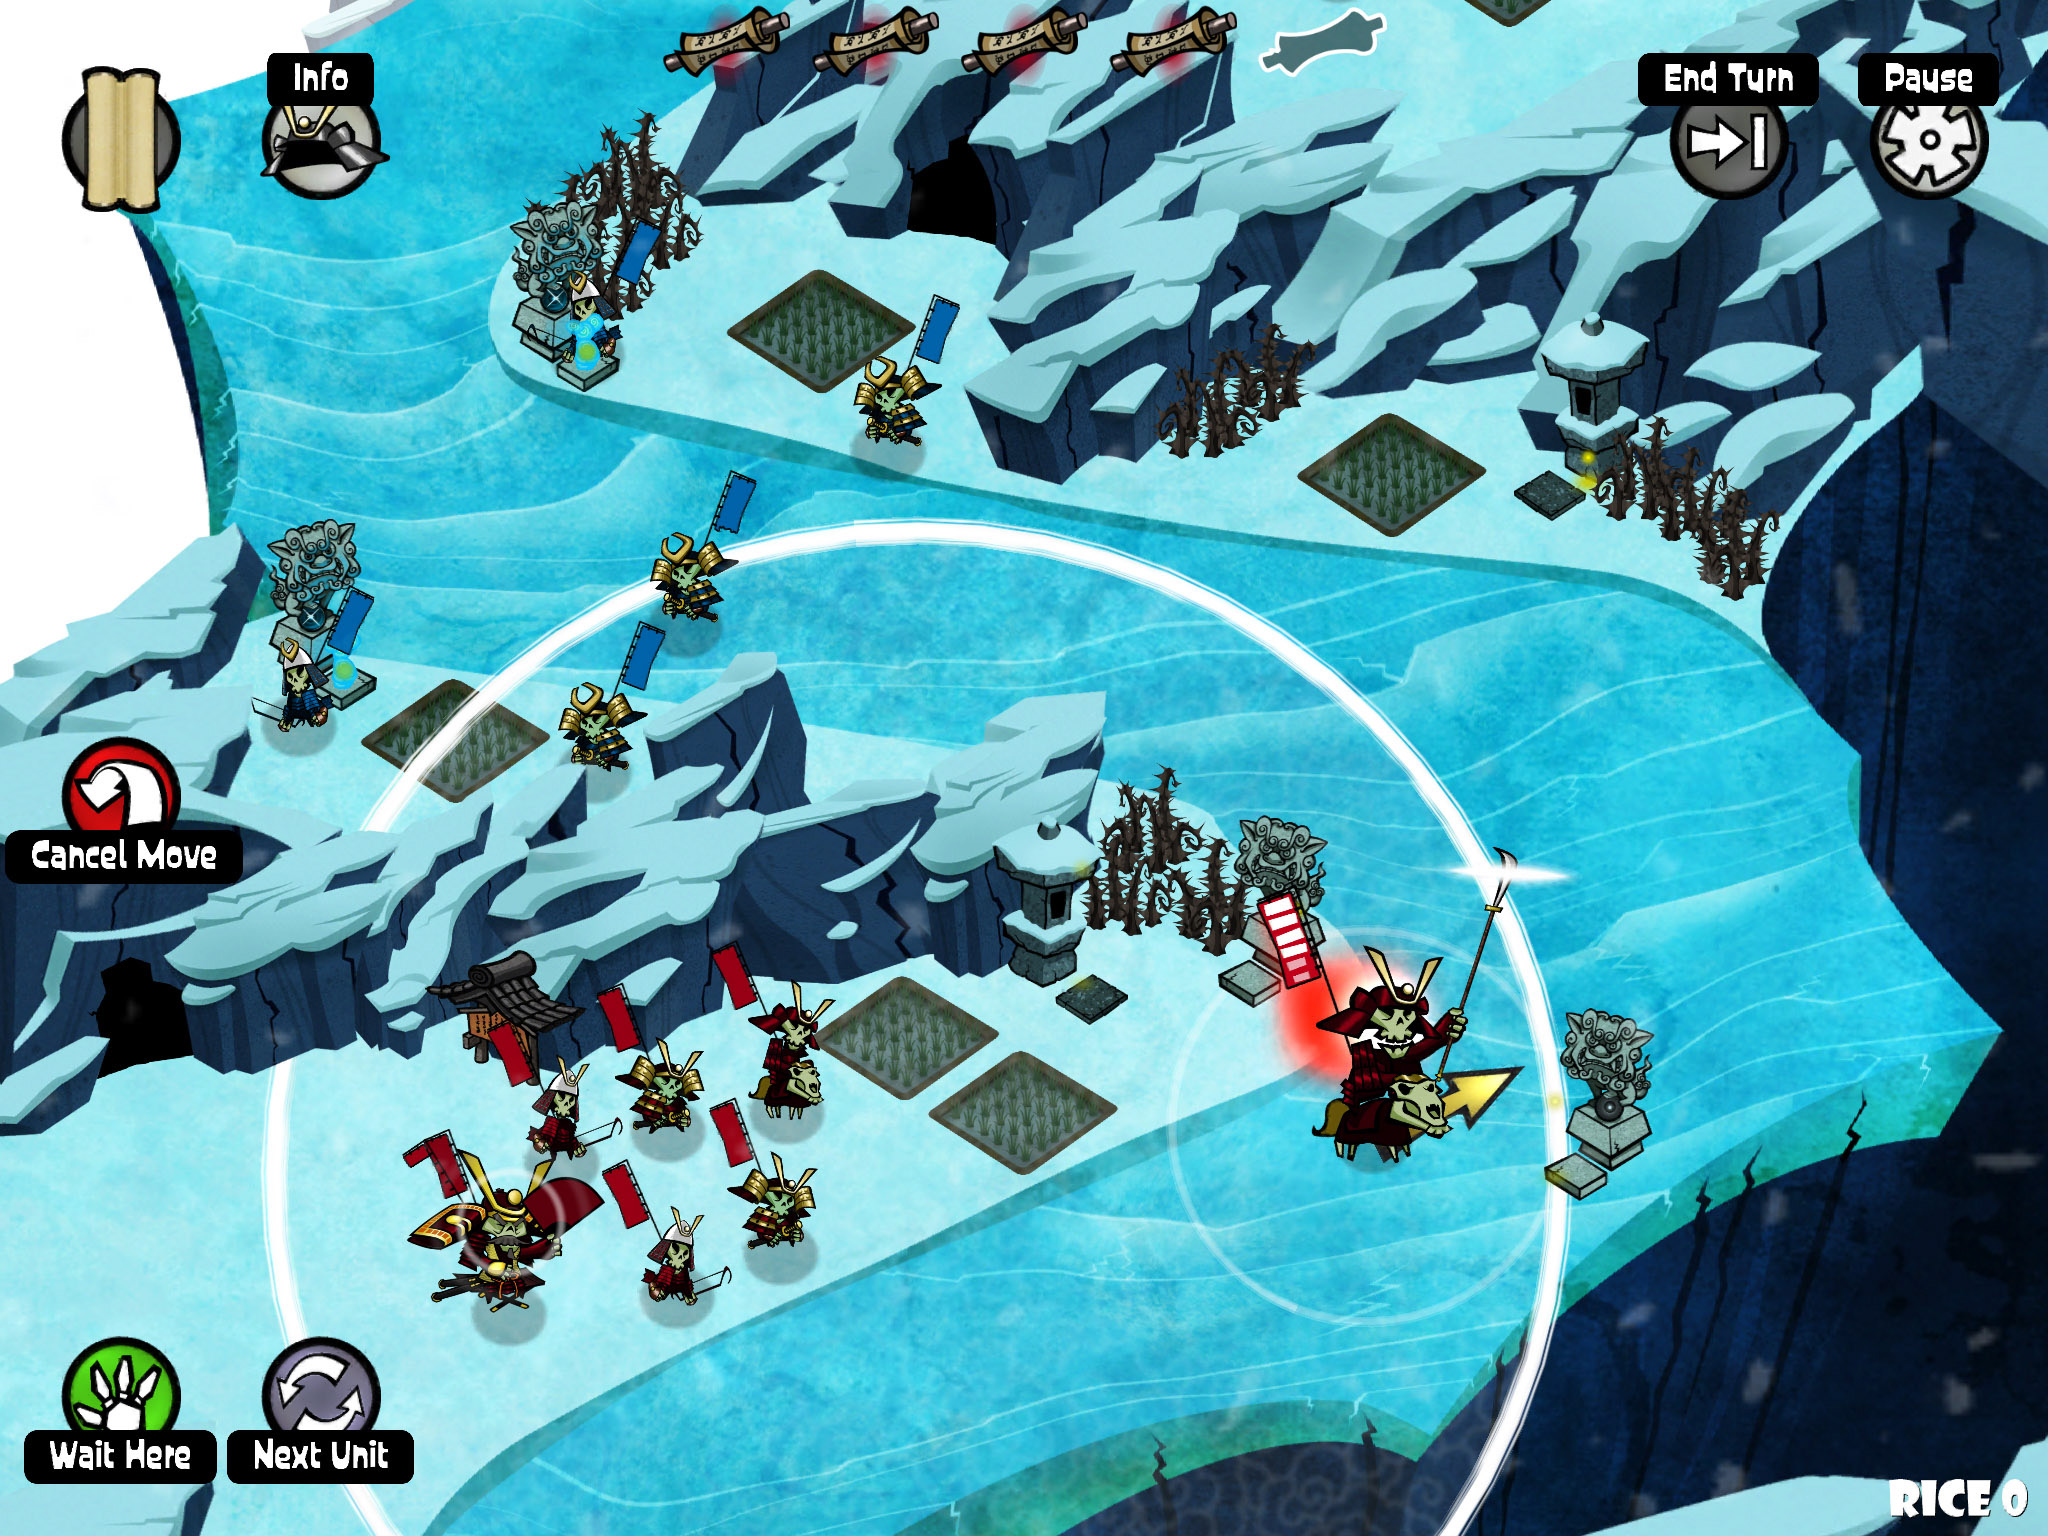 Skulls Of The Shogun Finally Makes It To iOS, And It’s Brilliant